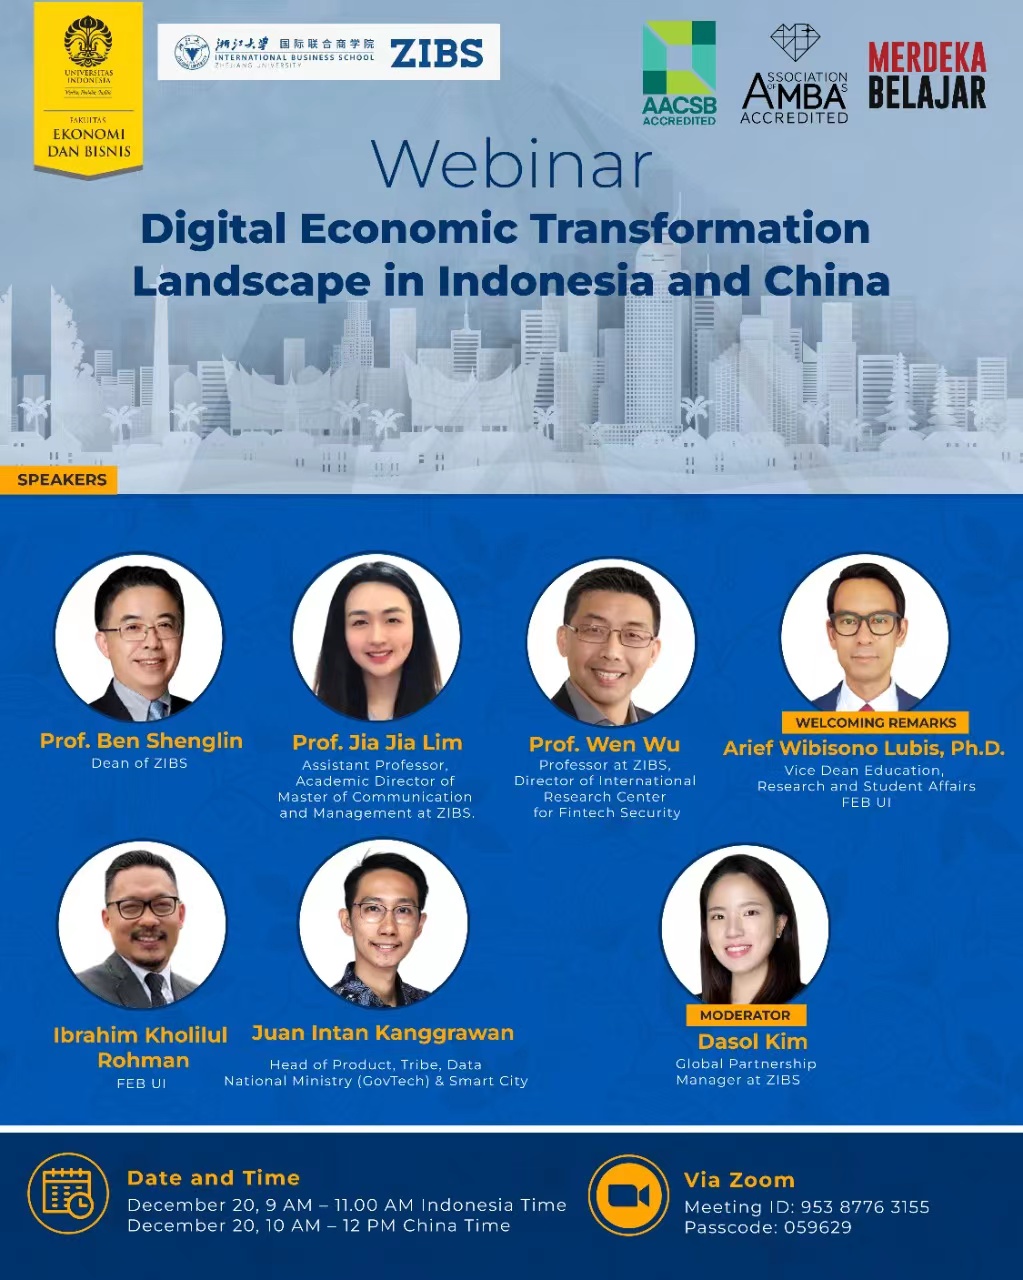 Digital Economic Transformation Landscape in Indonesia and China